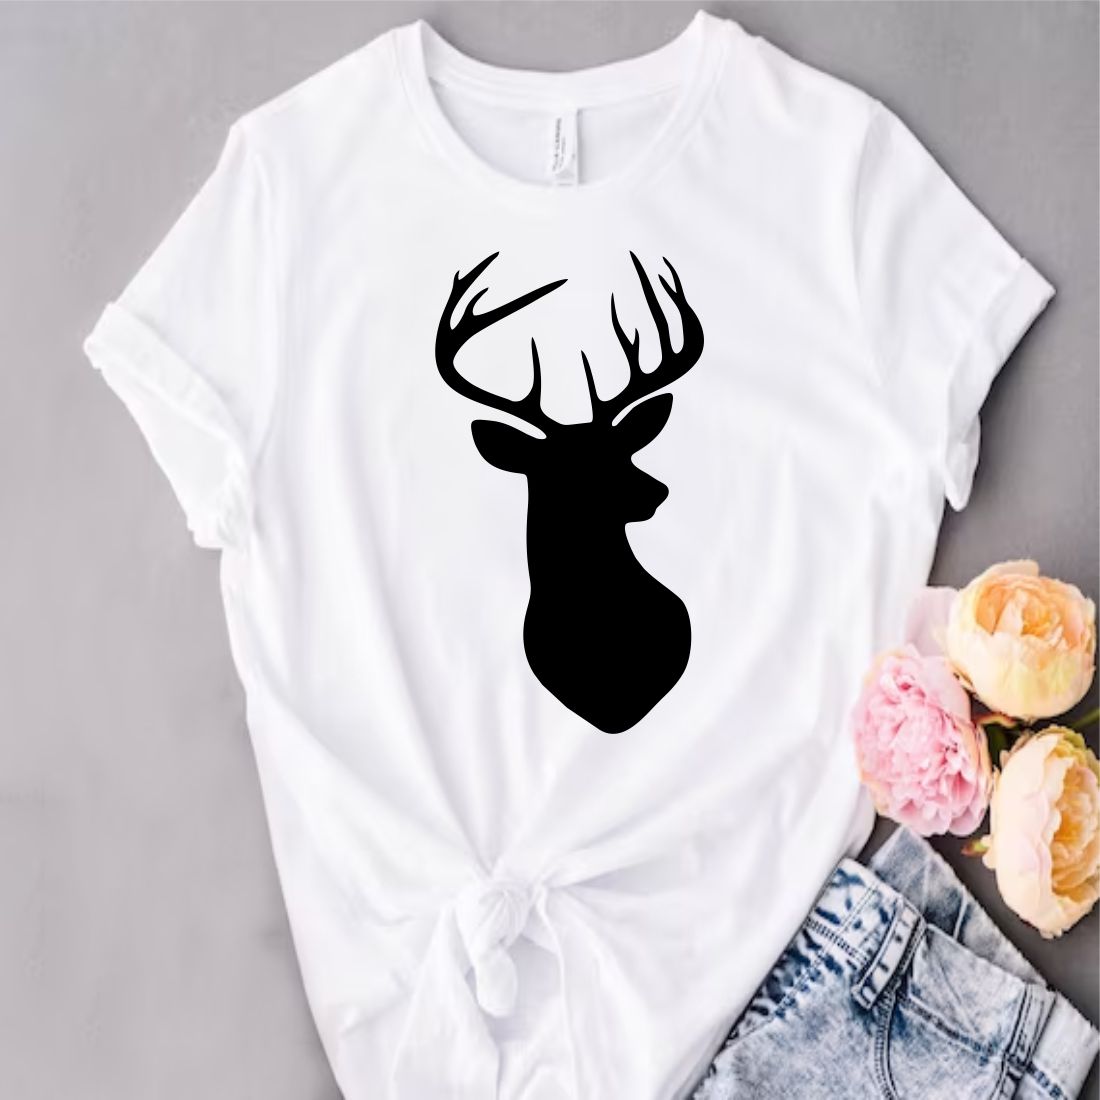 T - shirt with a deer head on it.